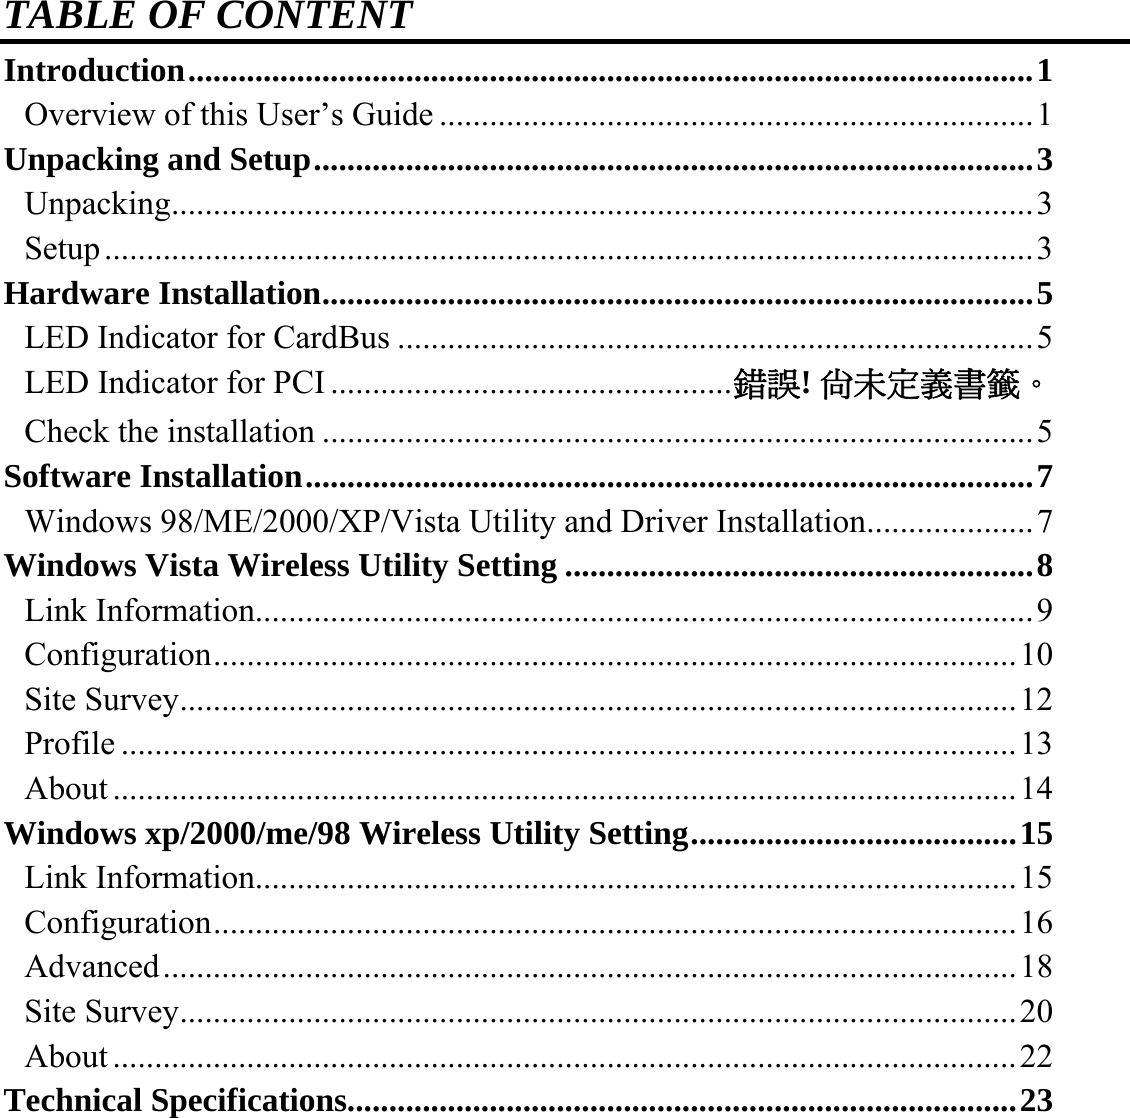 TABLE OF CONTENT Introduction.....................................................................................................1 Overview of this User’s Guide .......................................................................1 Unpacking and Setup......................................................................................3 Unpacking.......................................................................................................3 Setup...............................................................................................................3 Hardware Installation.....................................................................................5 LED Indicator for CardBus ............................................................................5 LED Indicator for PCI................................................錯誤! 尚未定義書籤。 Check the installation .....................................................................................5 Software Installation.......................................................................................7 Windows 98/ME/2000/XP/Vista Utility and Driver Installation....................7 Windows Vista Wireless Utility Setting ........................................................8 Link Information.............................................................................................9 Configuration................................................................................................10 Site Survey....................................................................................................12 Profile ...........................................................................................................13 About............................................................................................................14 Windows xp/2000/me/98 Wireless Utility Setting.......................................15 Link Information...........................................................................................15 Configuration................................................................................................16 Advanced......................................................................................................18 Site Survey....................................................................................................20 About............................................................................................................22 Technical Specifications................................................................................23   